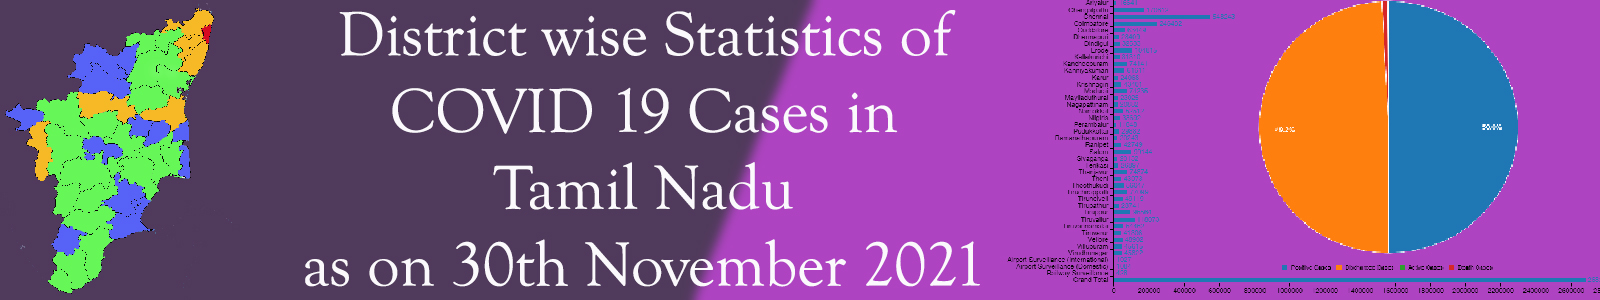 District wise Statistics of COVID 19